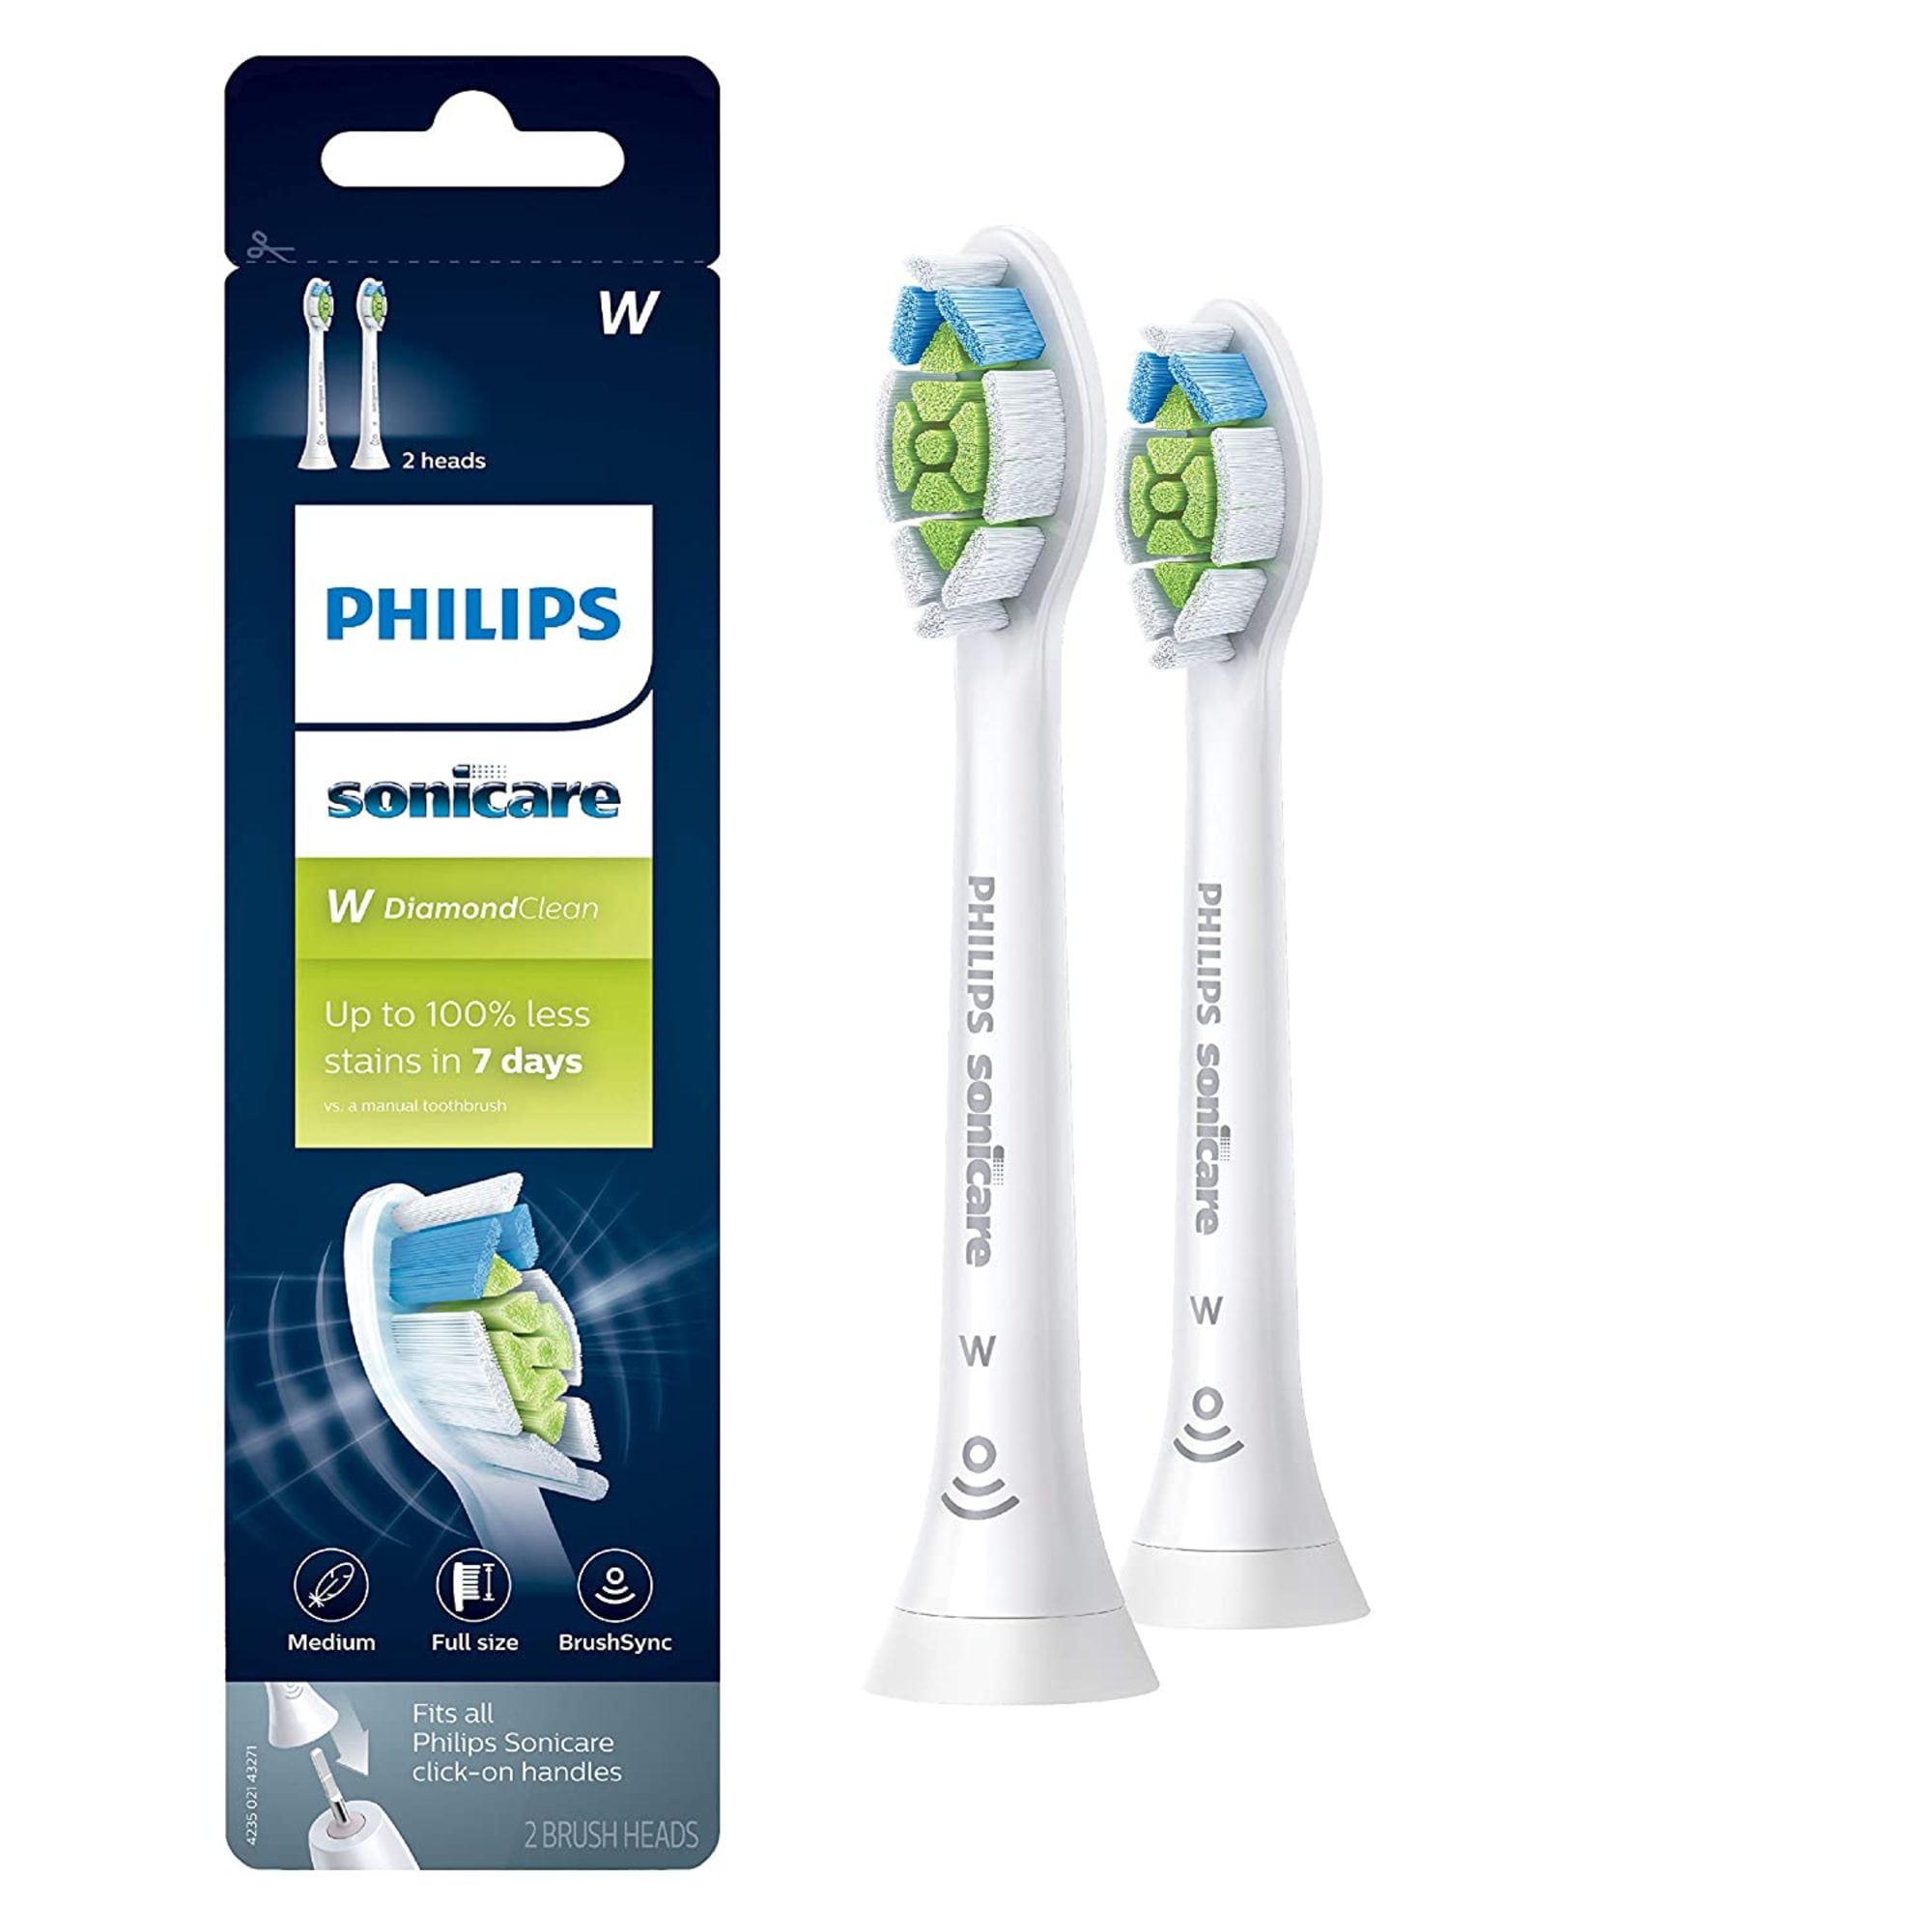 Philips Sonicare E-Series Replacement Toothbrush Heads, HX7023/64 